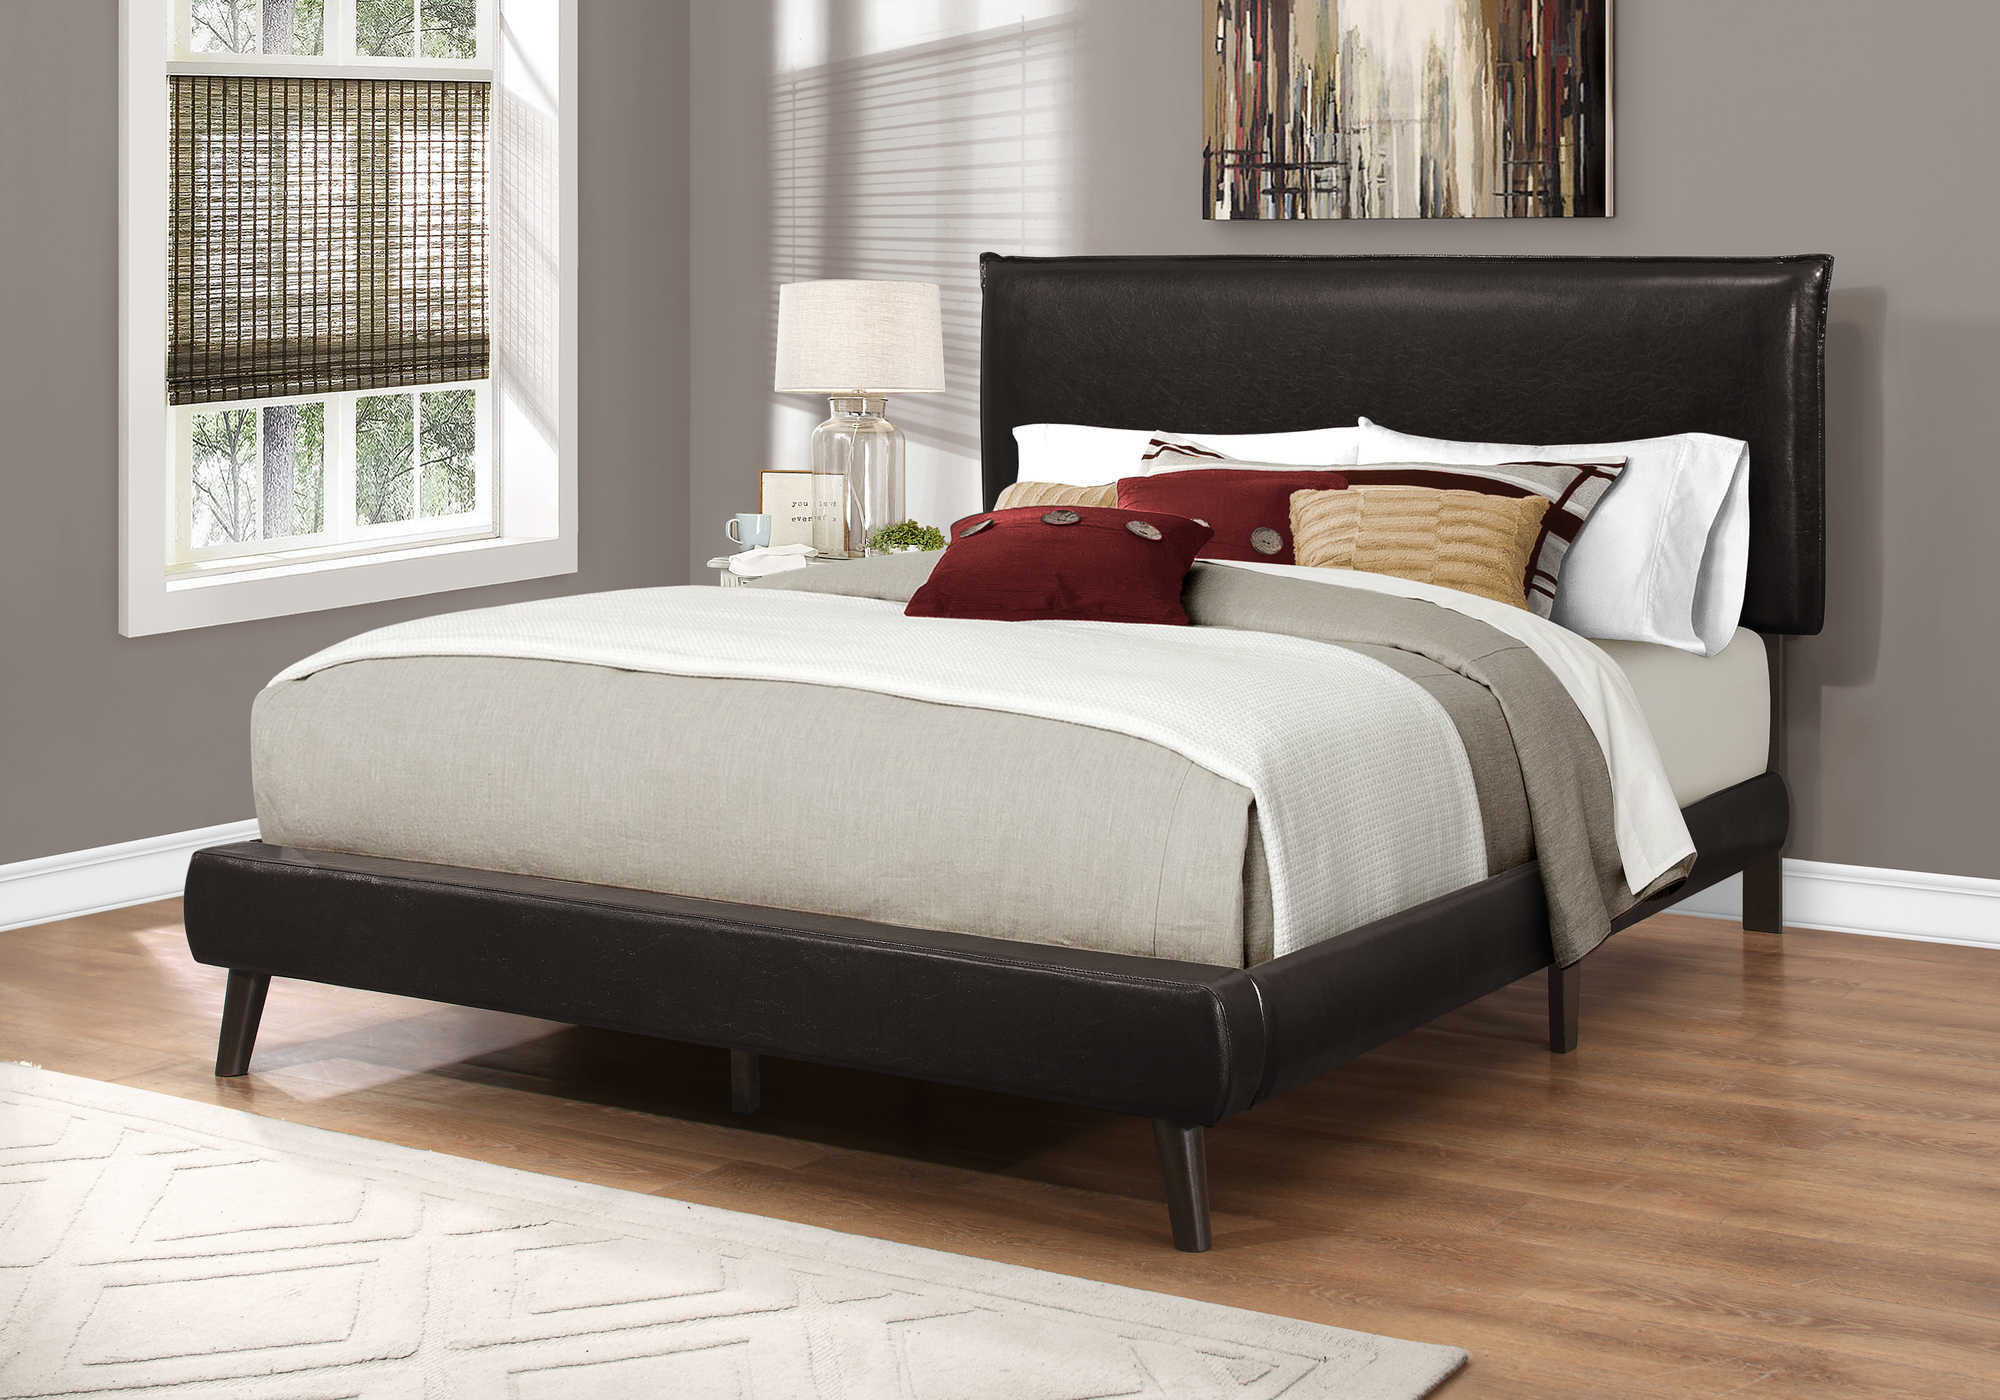 BED - QUEEN SIZE / BROWN LEATHER-LOOK WITH WOOD LEGS